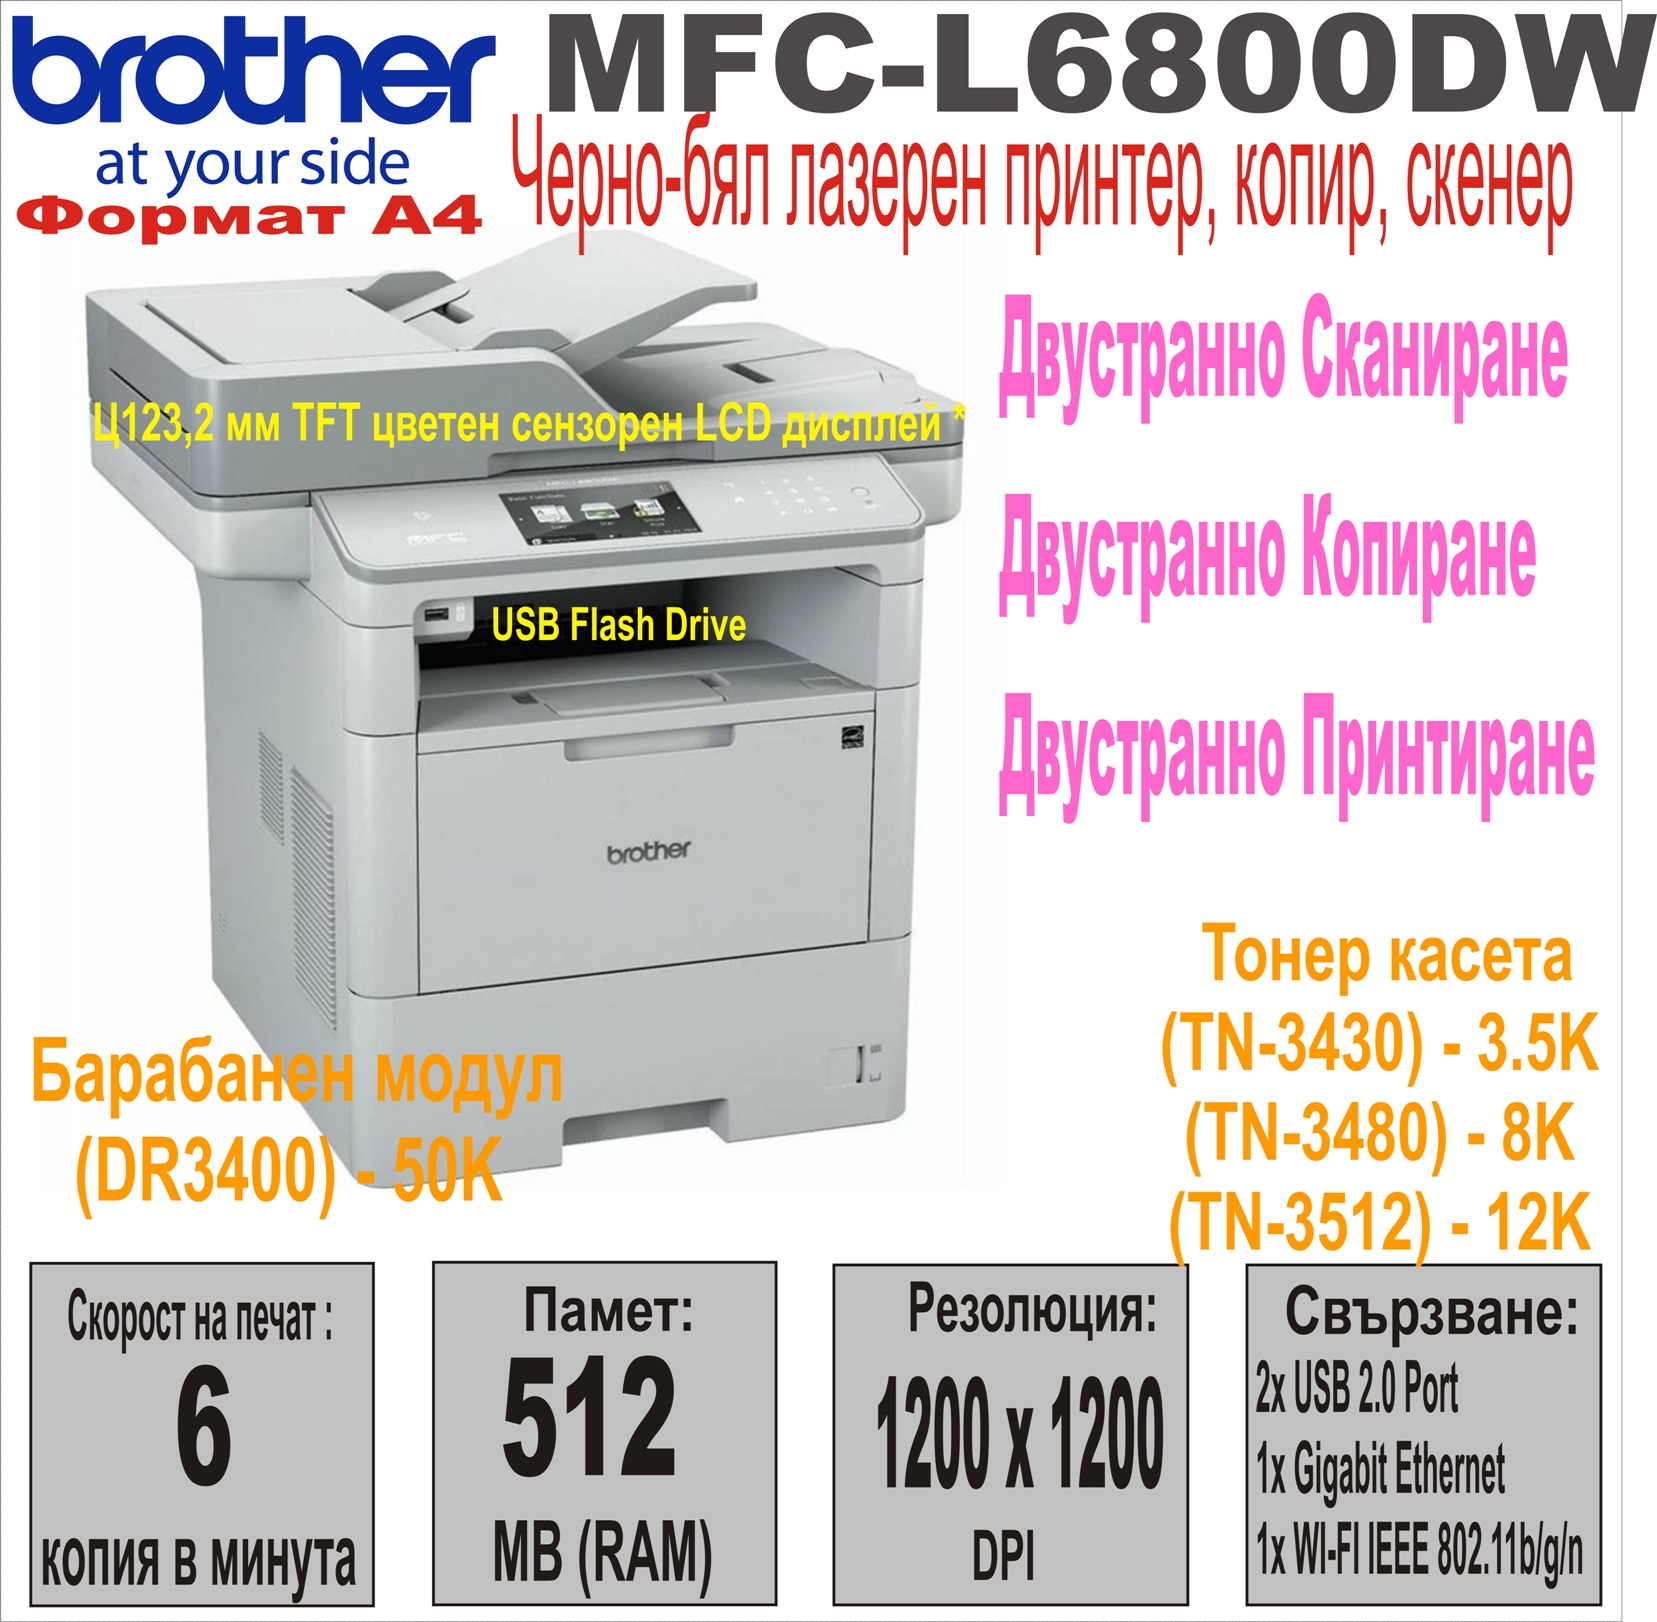 All-in-One Mono Brother MFC-L6800DW